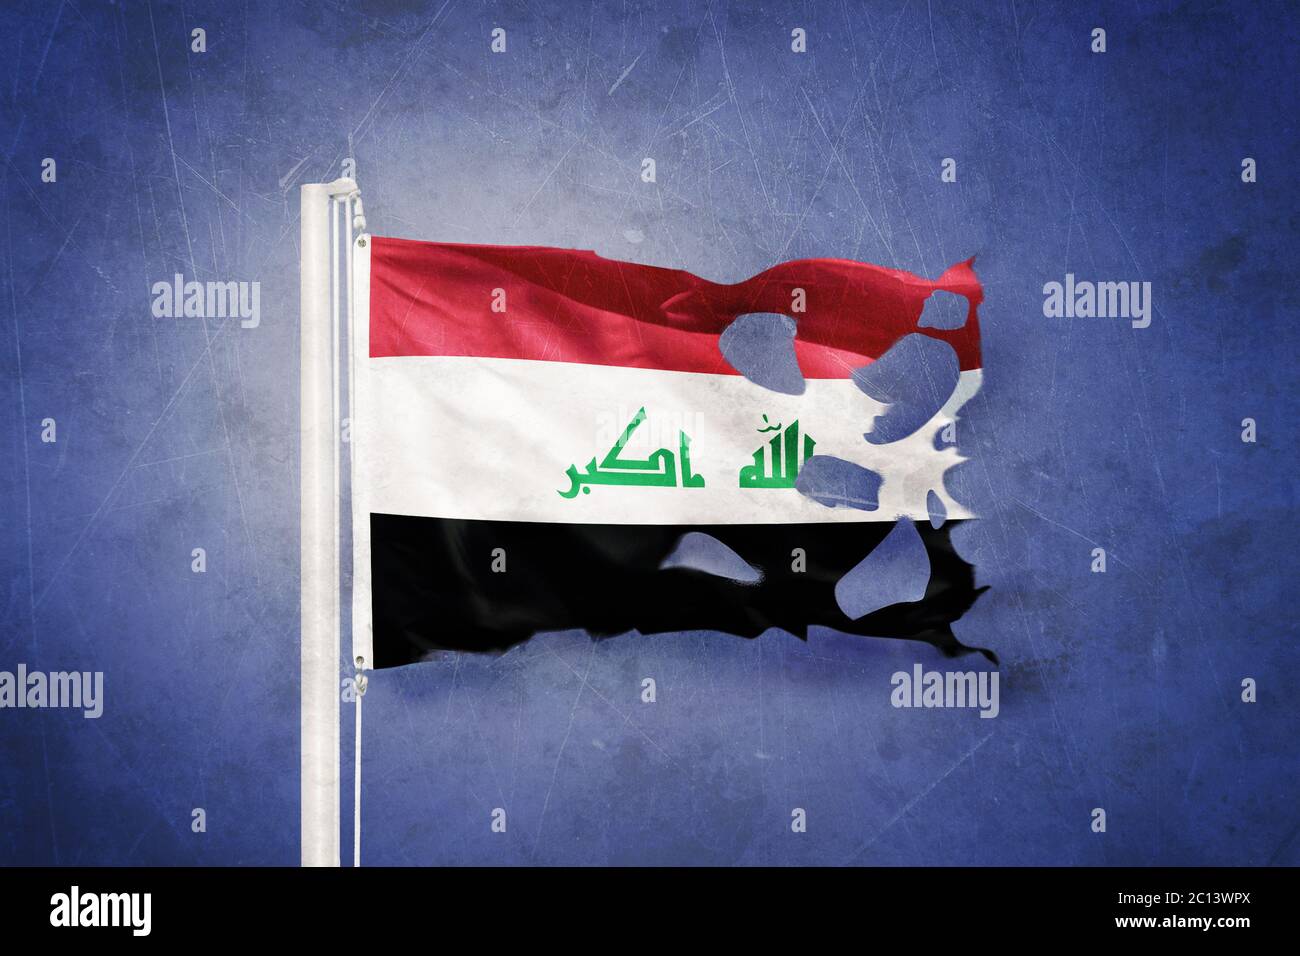 Torn flag of Iraq flying against grunge background Stock Photo